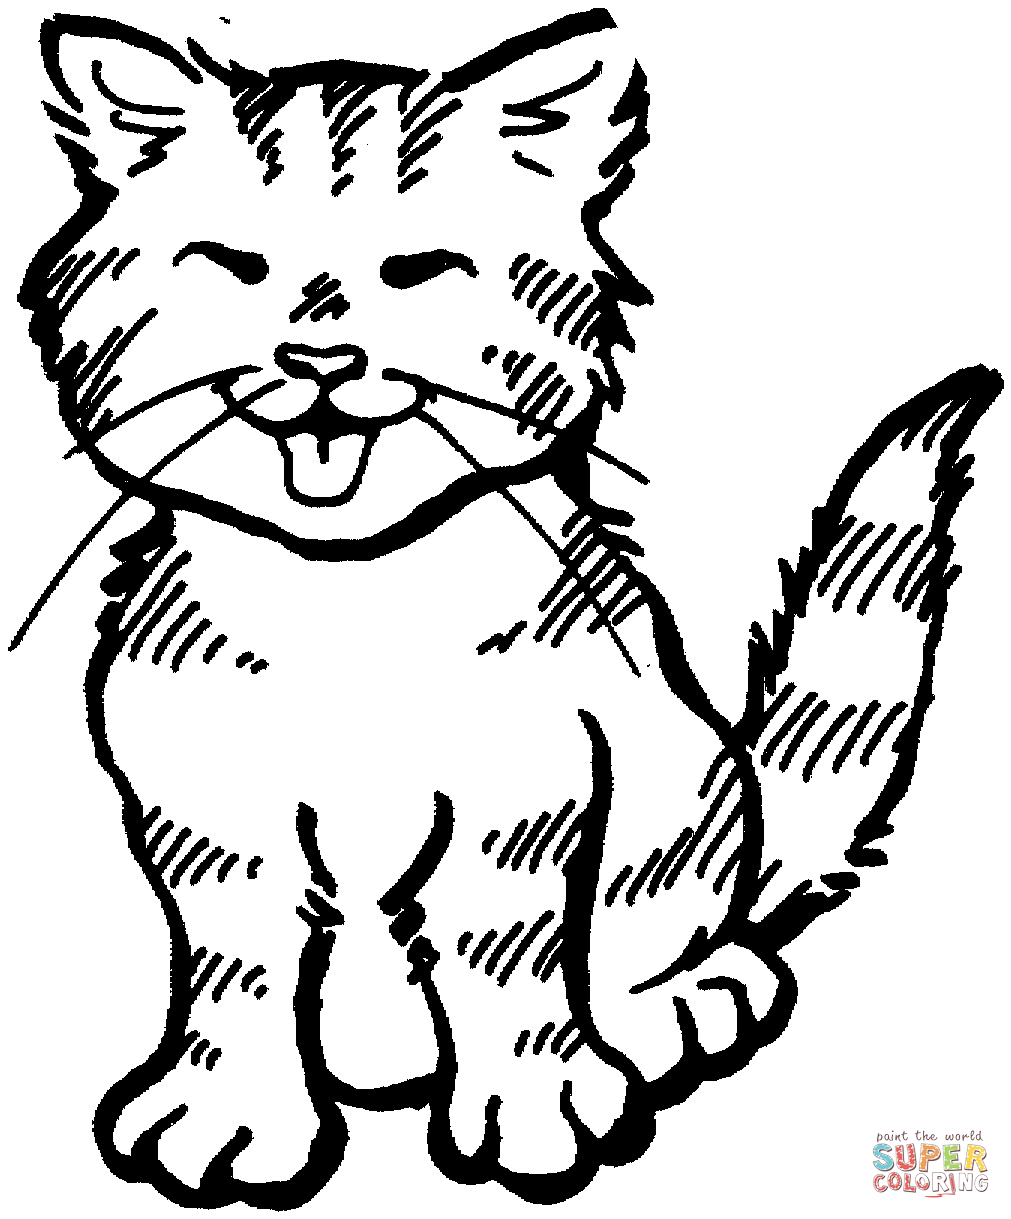 Cute Kitten coloring page | Free Printable Coloring Pages